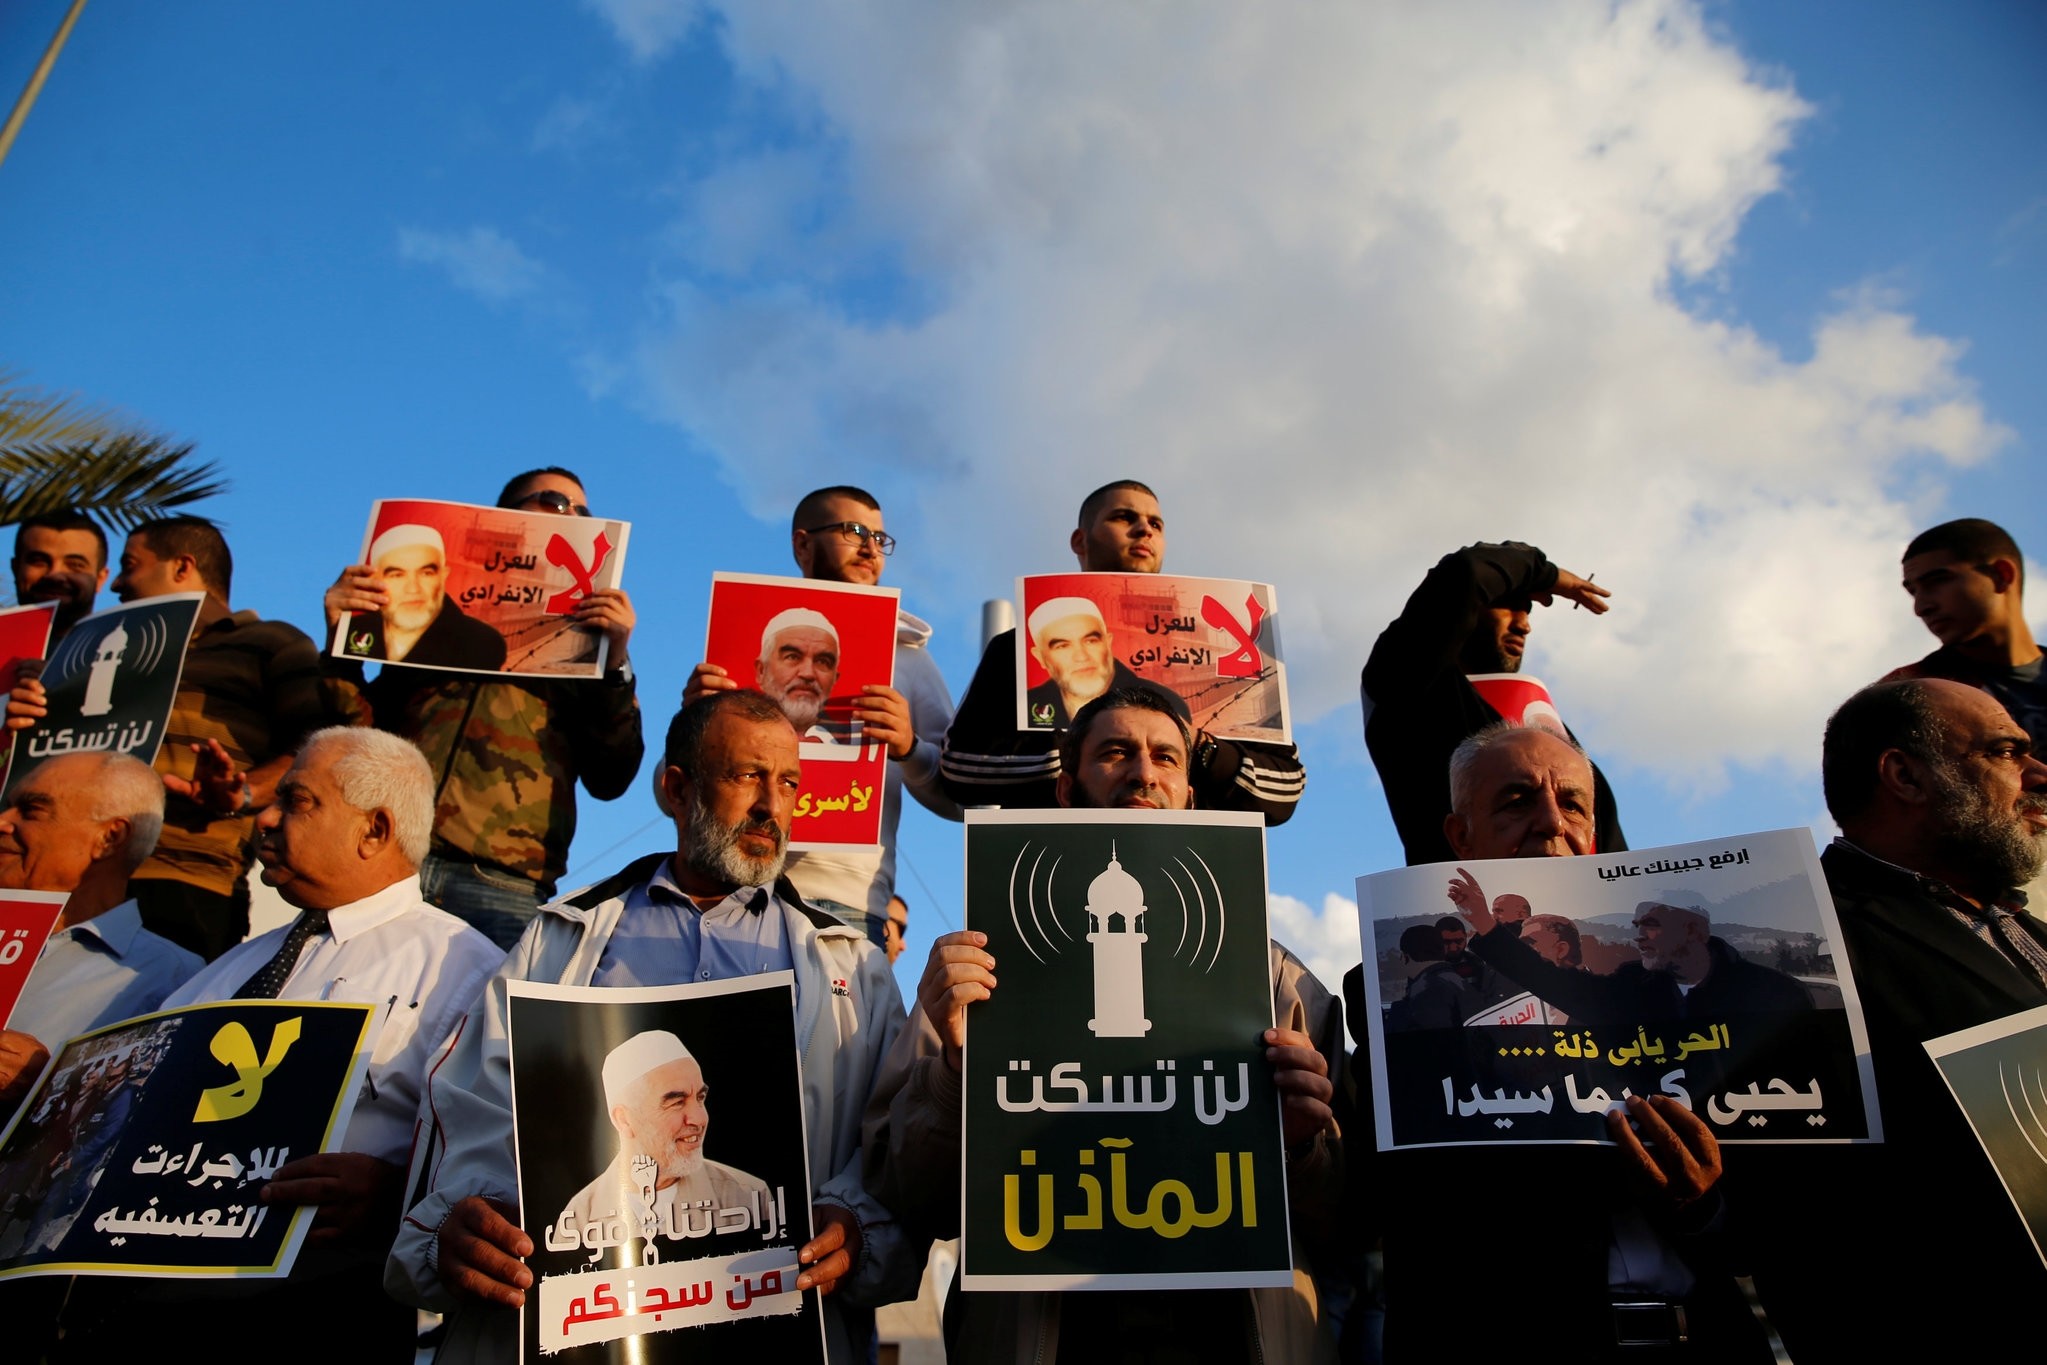 Palestinians protest against the initial approval of a bill to enforce lowering the volume of mosque loudspeakers calling worshippers to prayer, November 17, 2016. (REUTERS PHOTO)